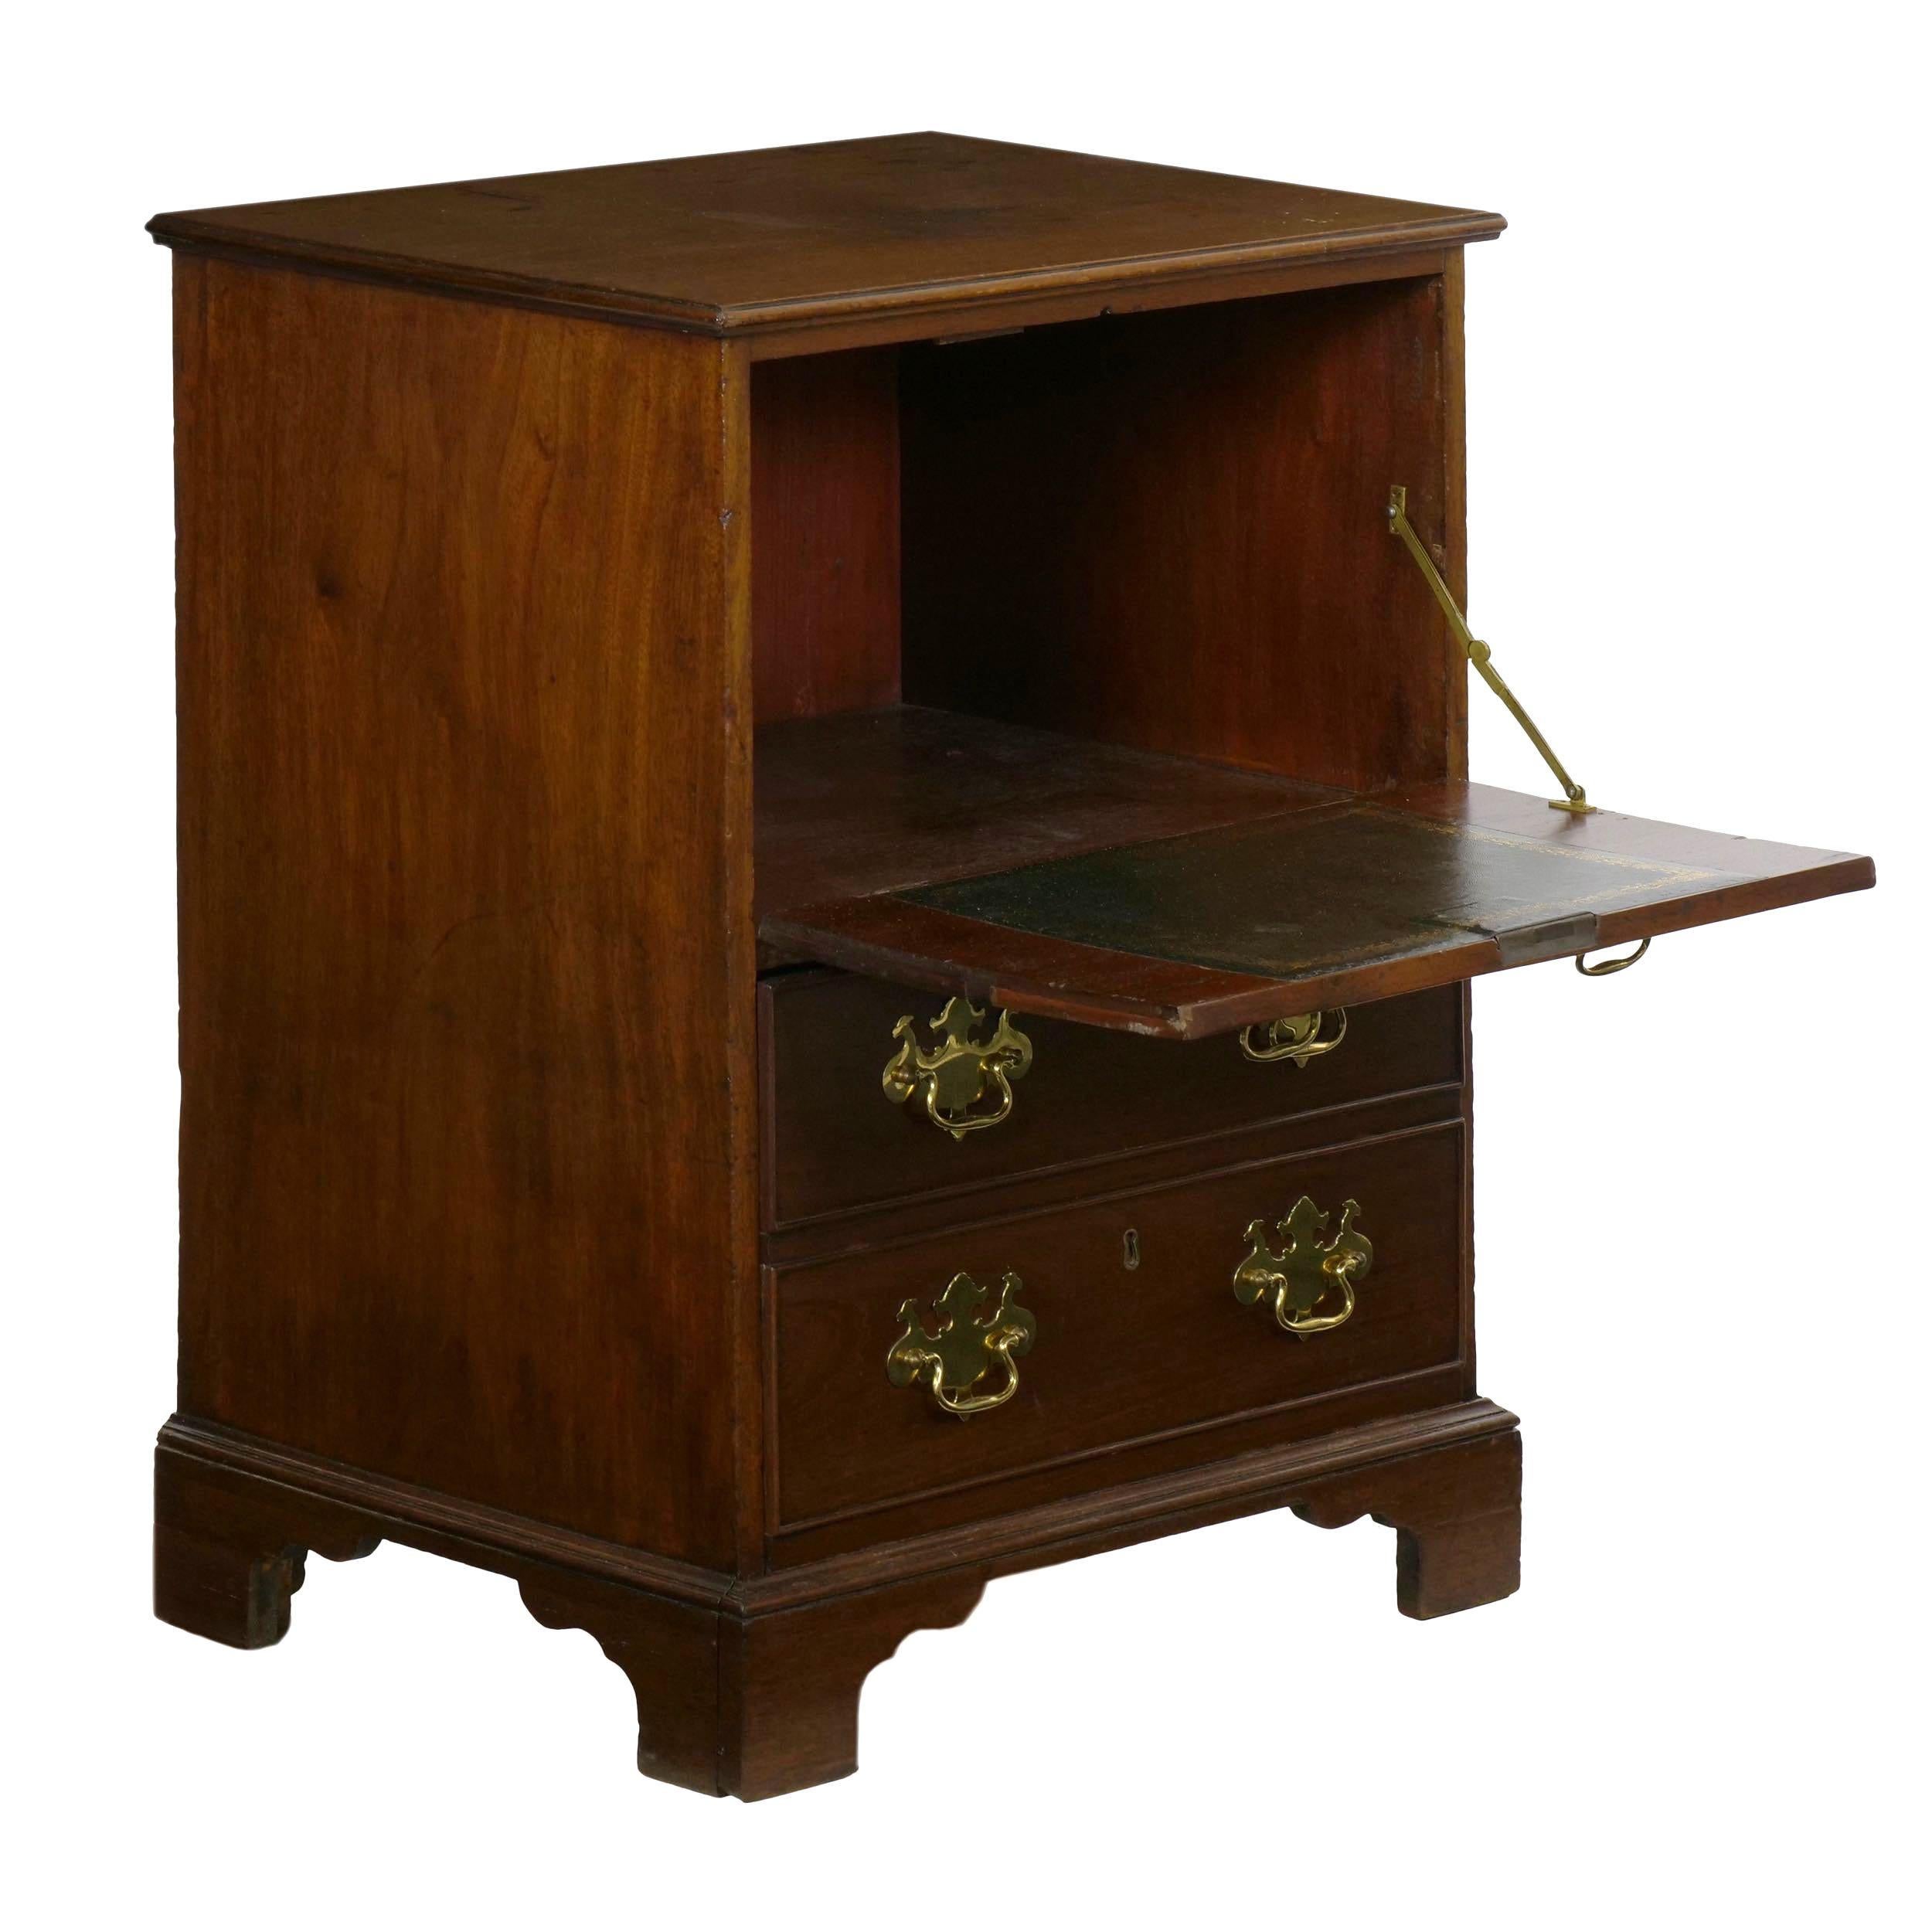 An attractive bedside cabinet, it has been adjusted and altered to allow for a rich George III aesthetic and natural aged surface patination while having a unique and useful form. The 